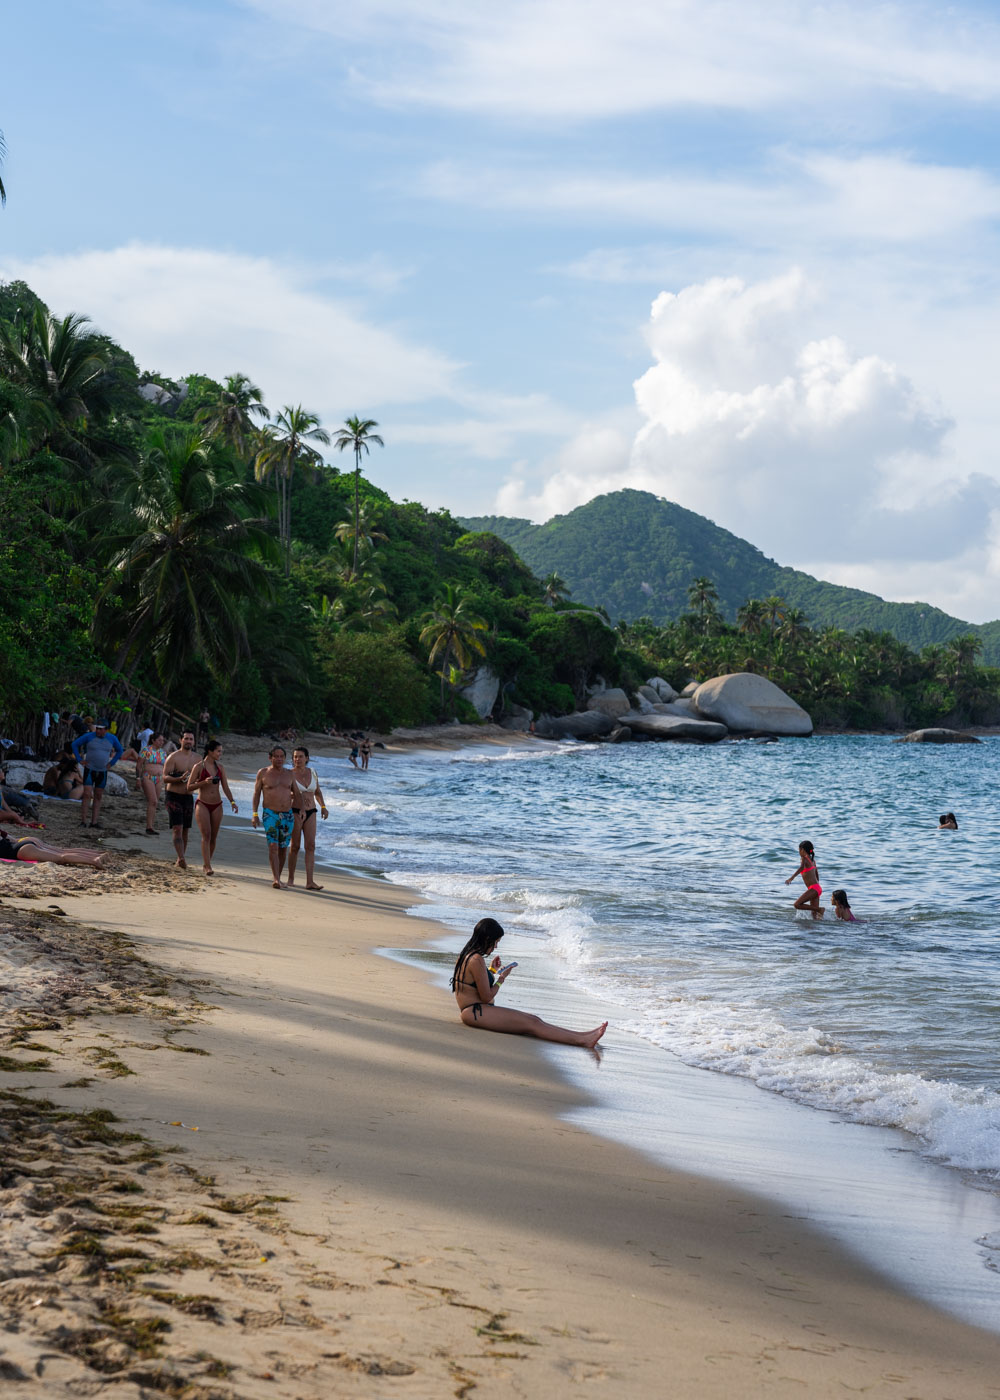 A girl on her phone sitting down on La Piscina beach in Tayrona National Park while other tourists go about their day.